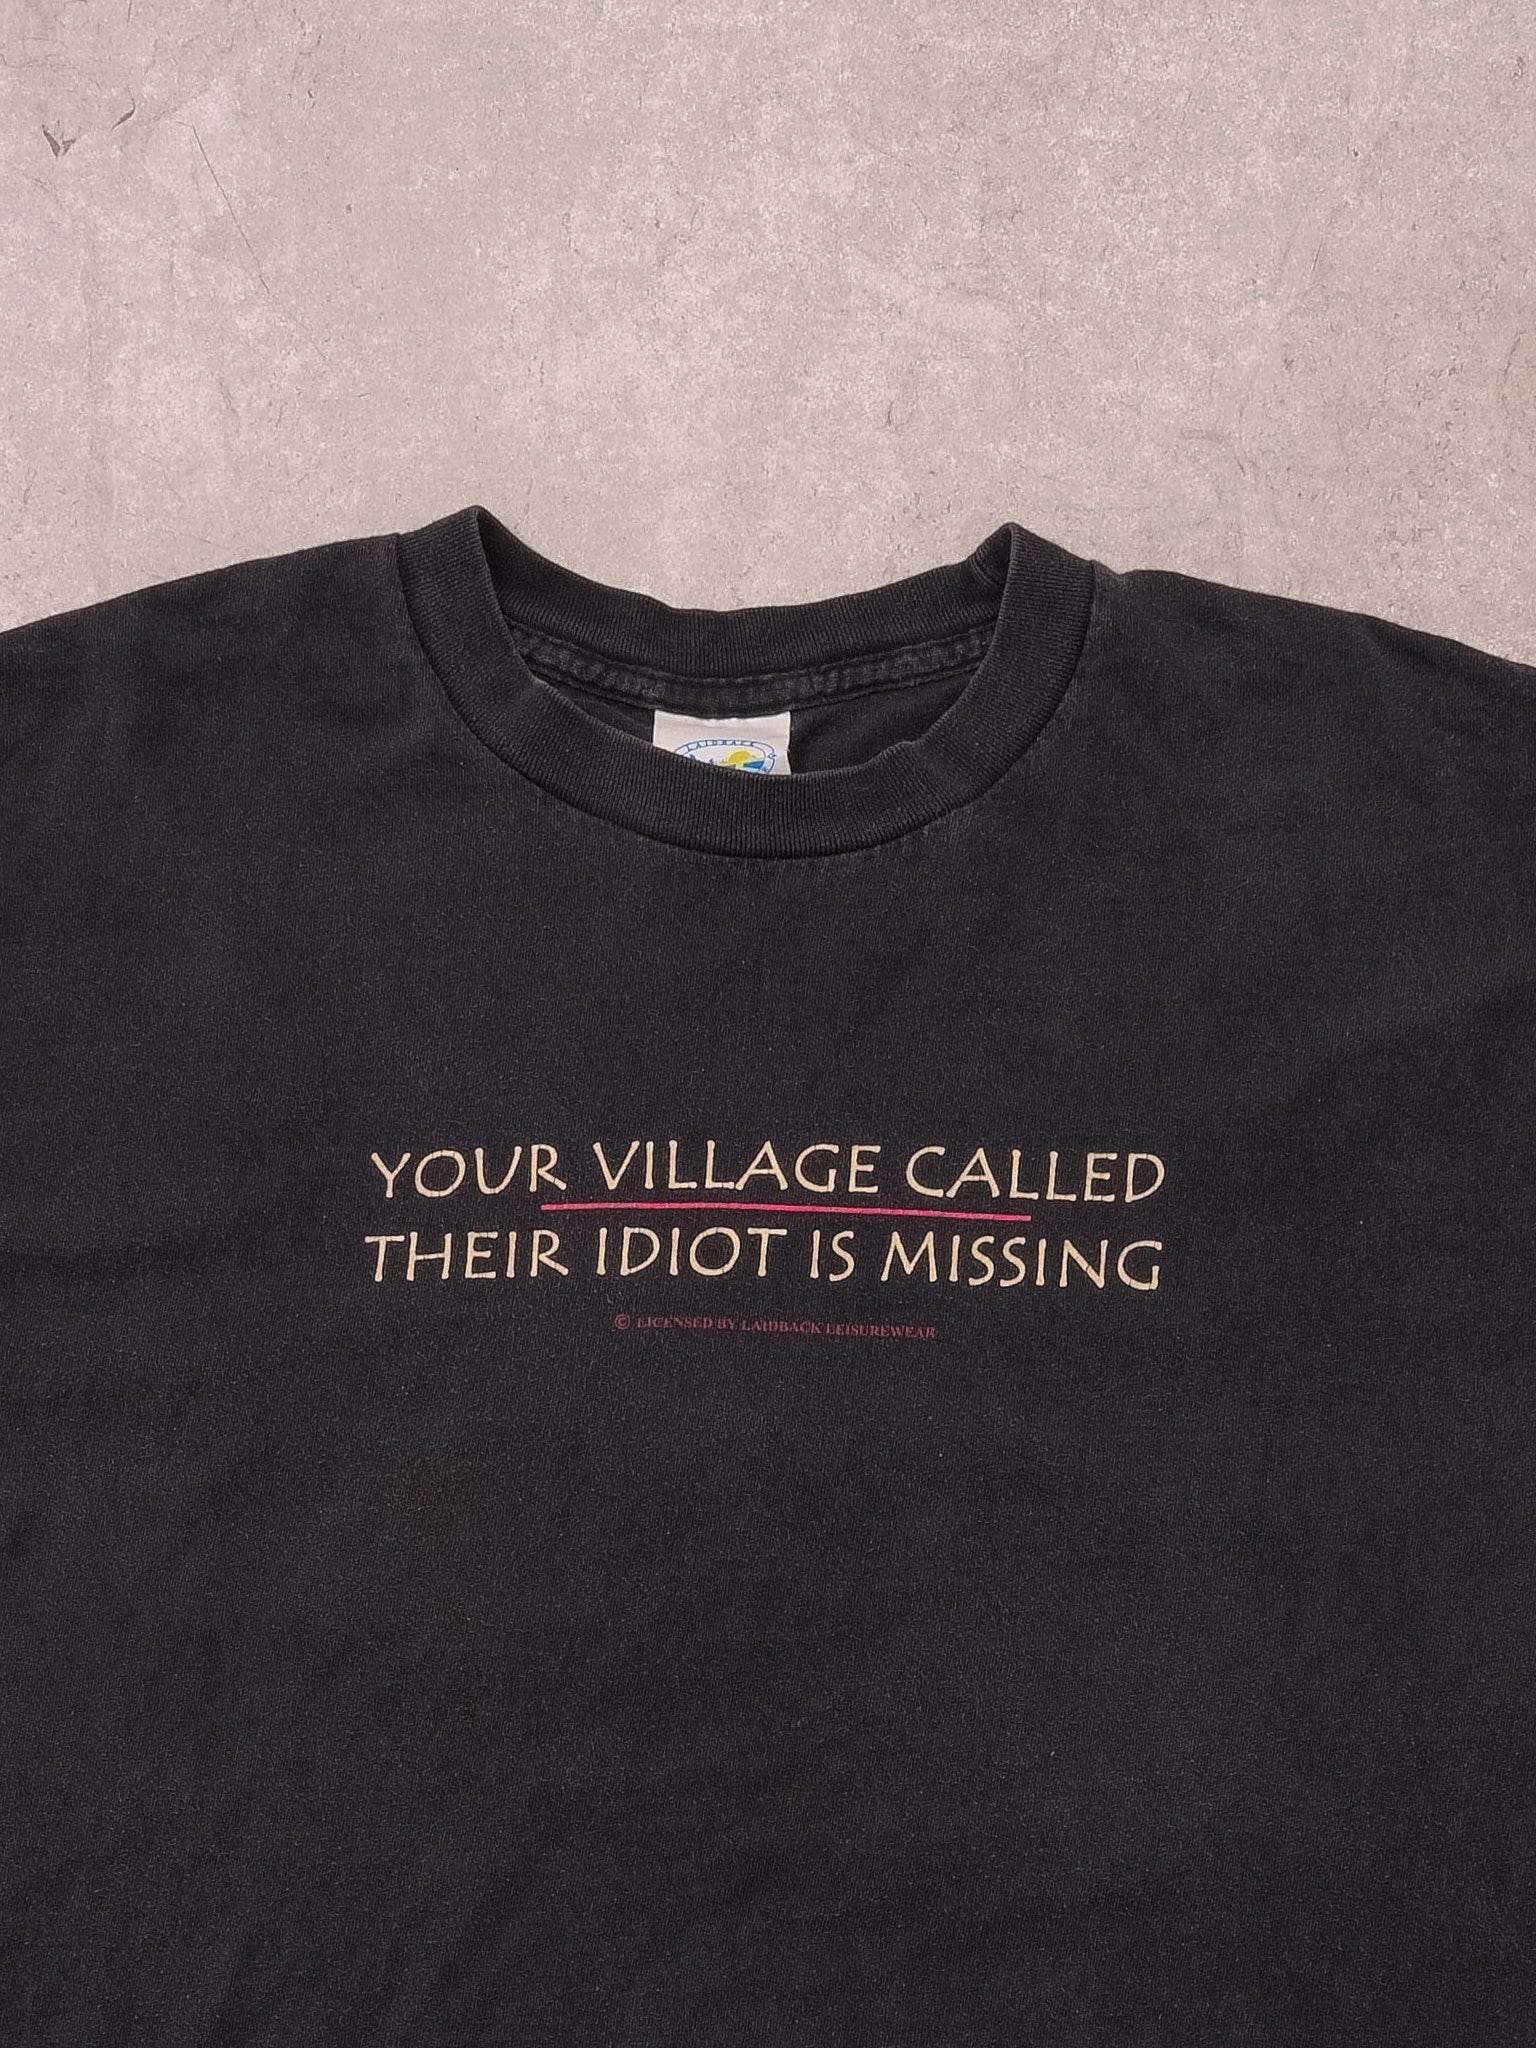 Vintage "Your Village Called Their Idiot Is Missing Tee" (M)